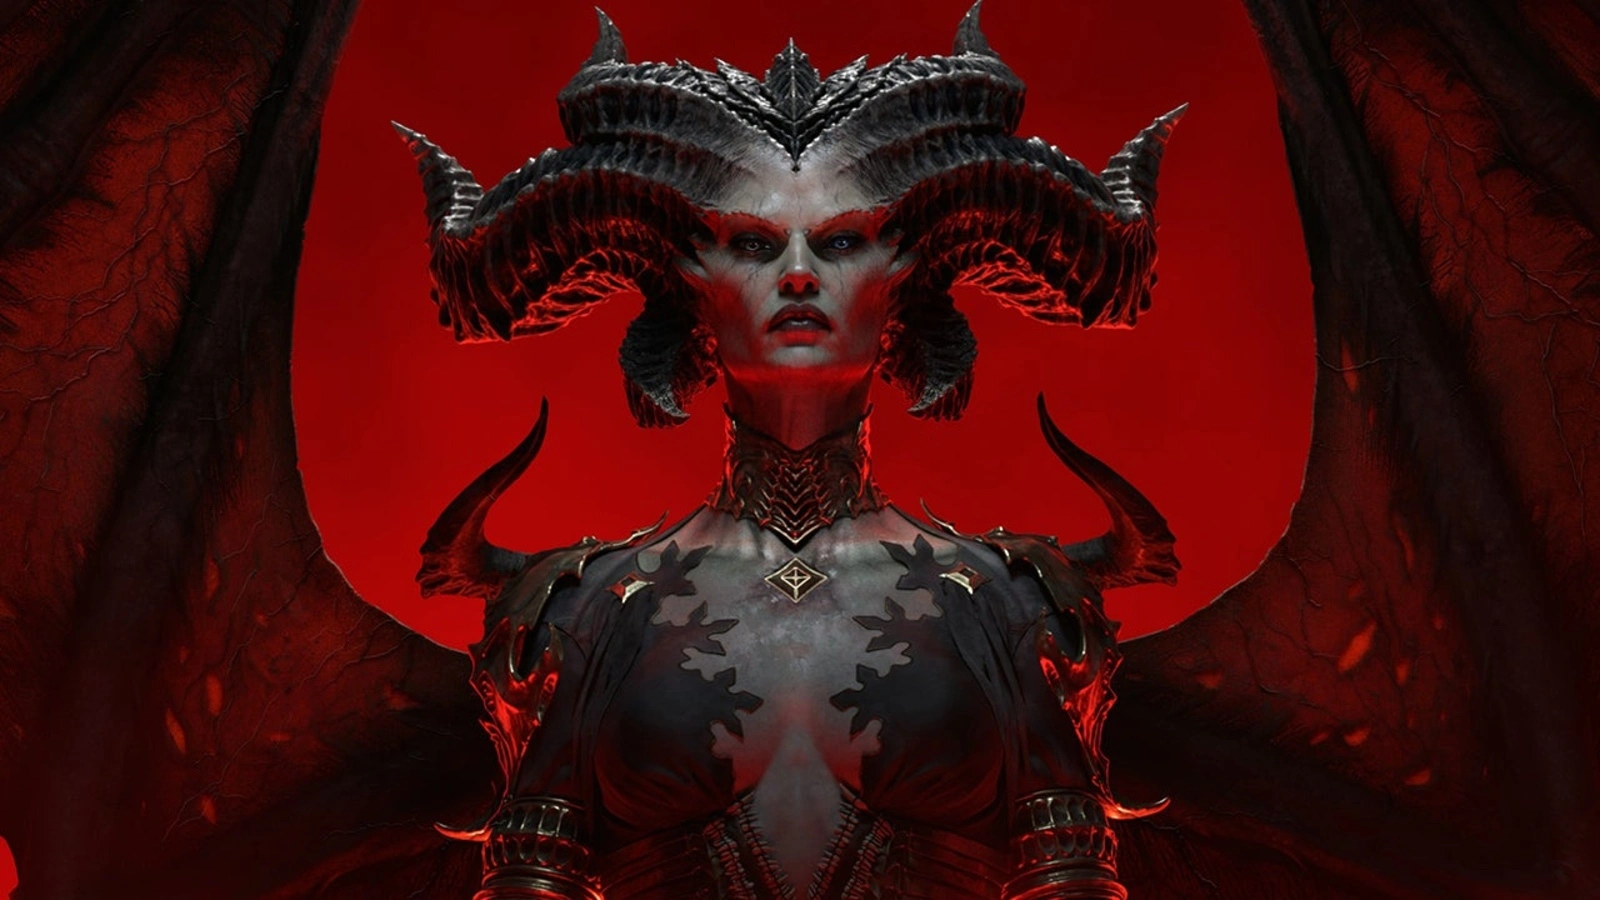 Workarounds to try until devs fix Diablo IV potent blood fountain bug